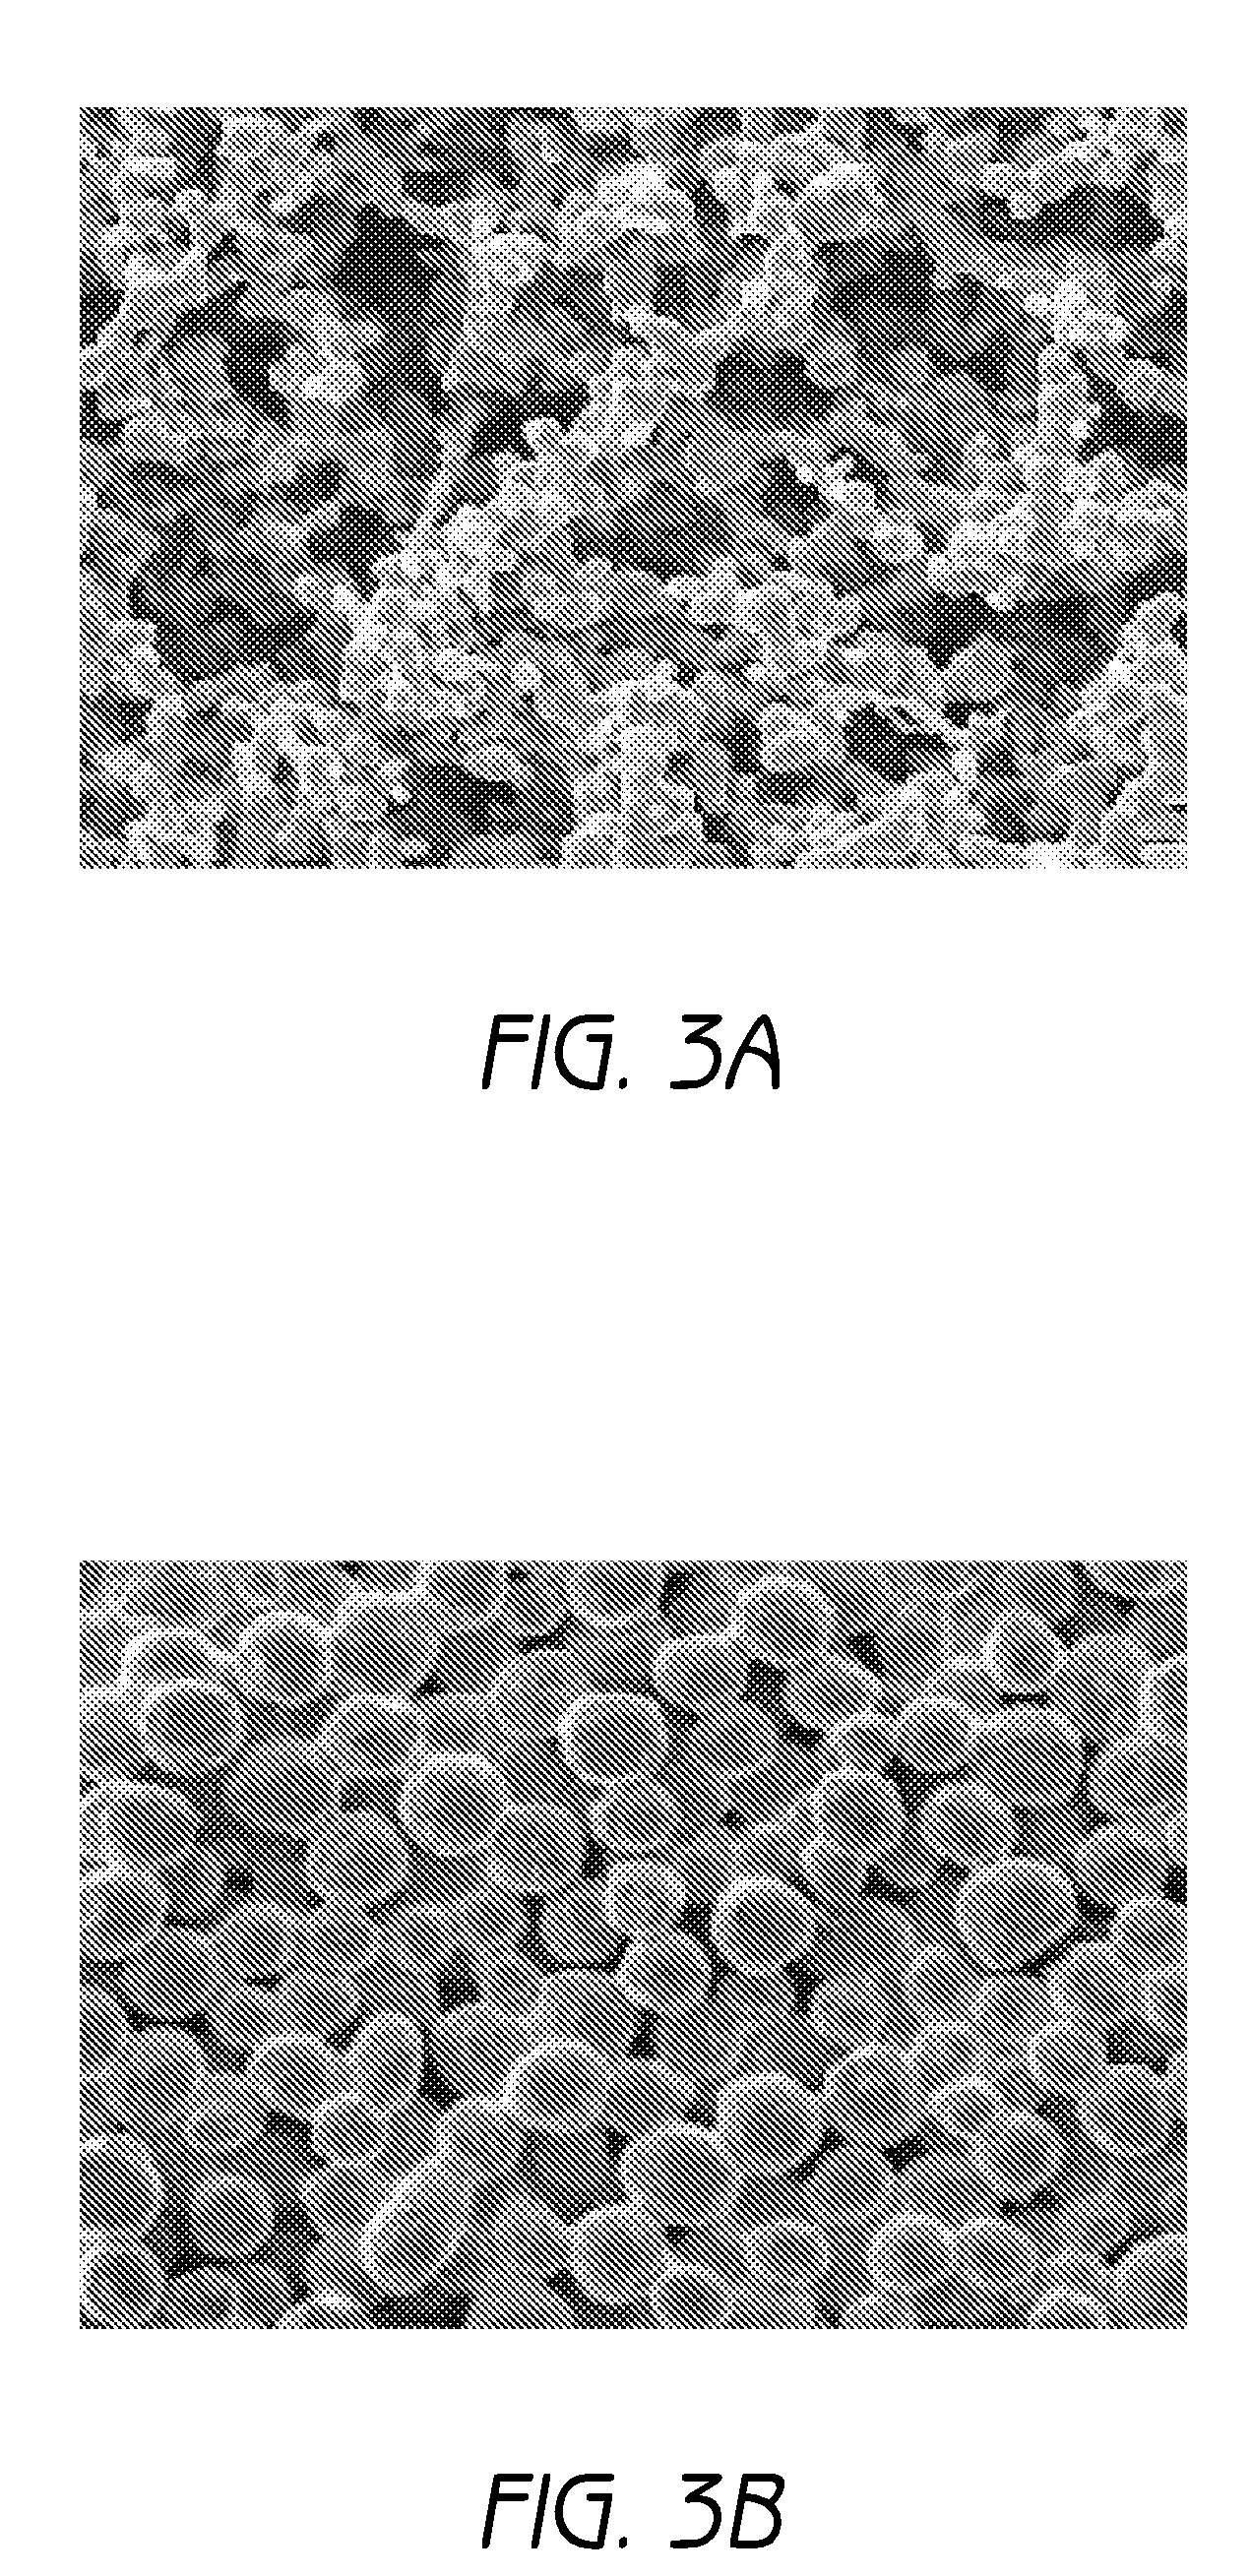 Method and apparatus for in vivo surveillance of circulating biological components